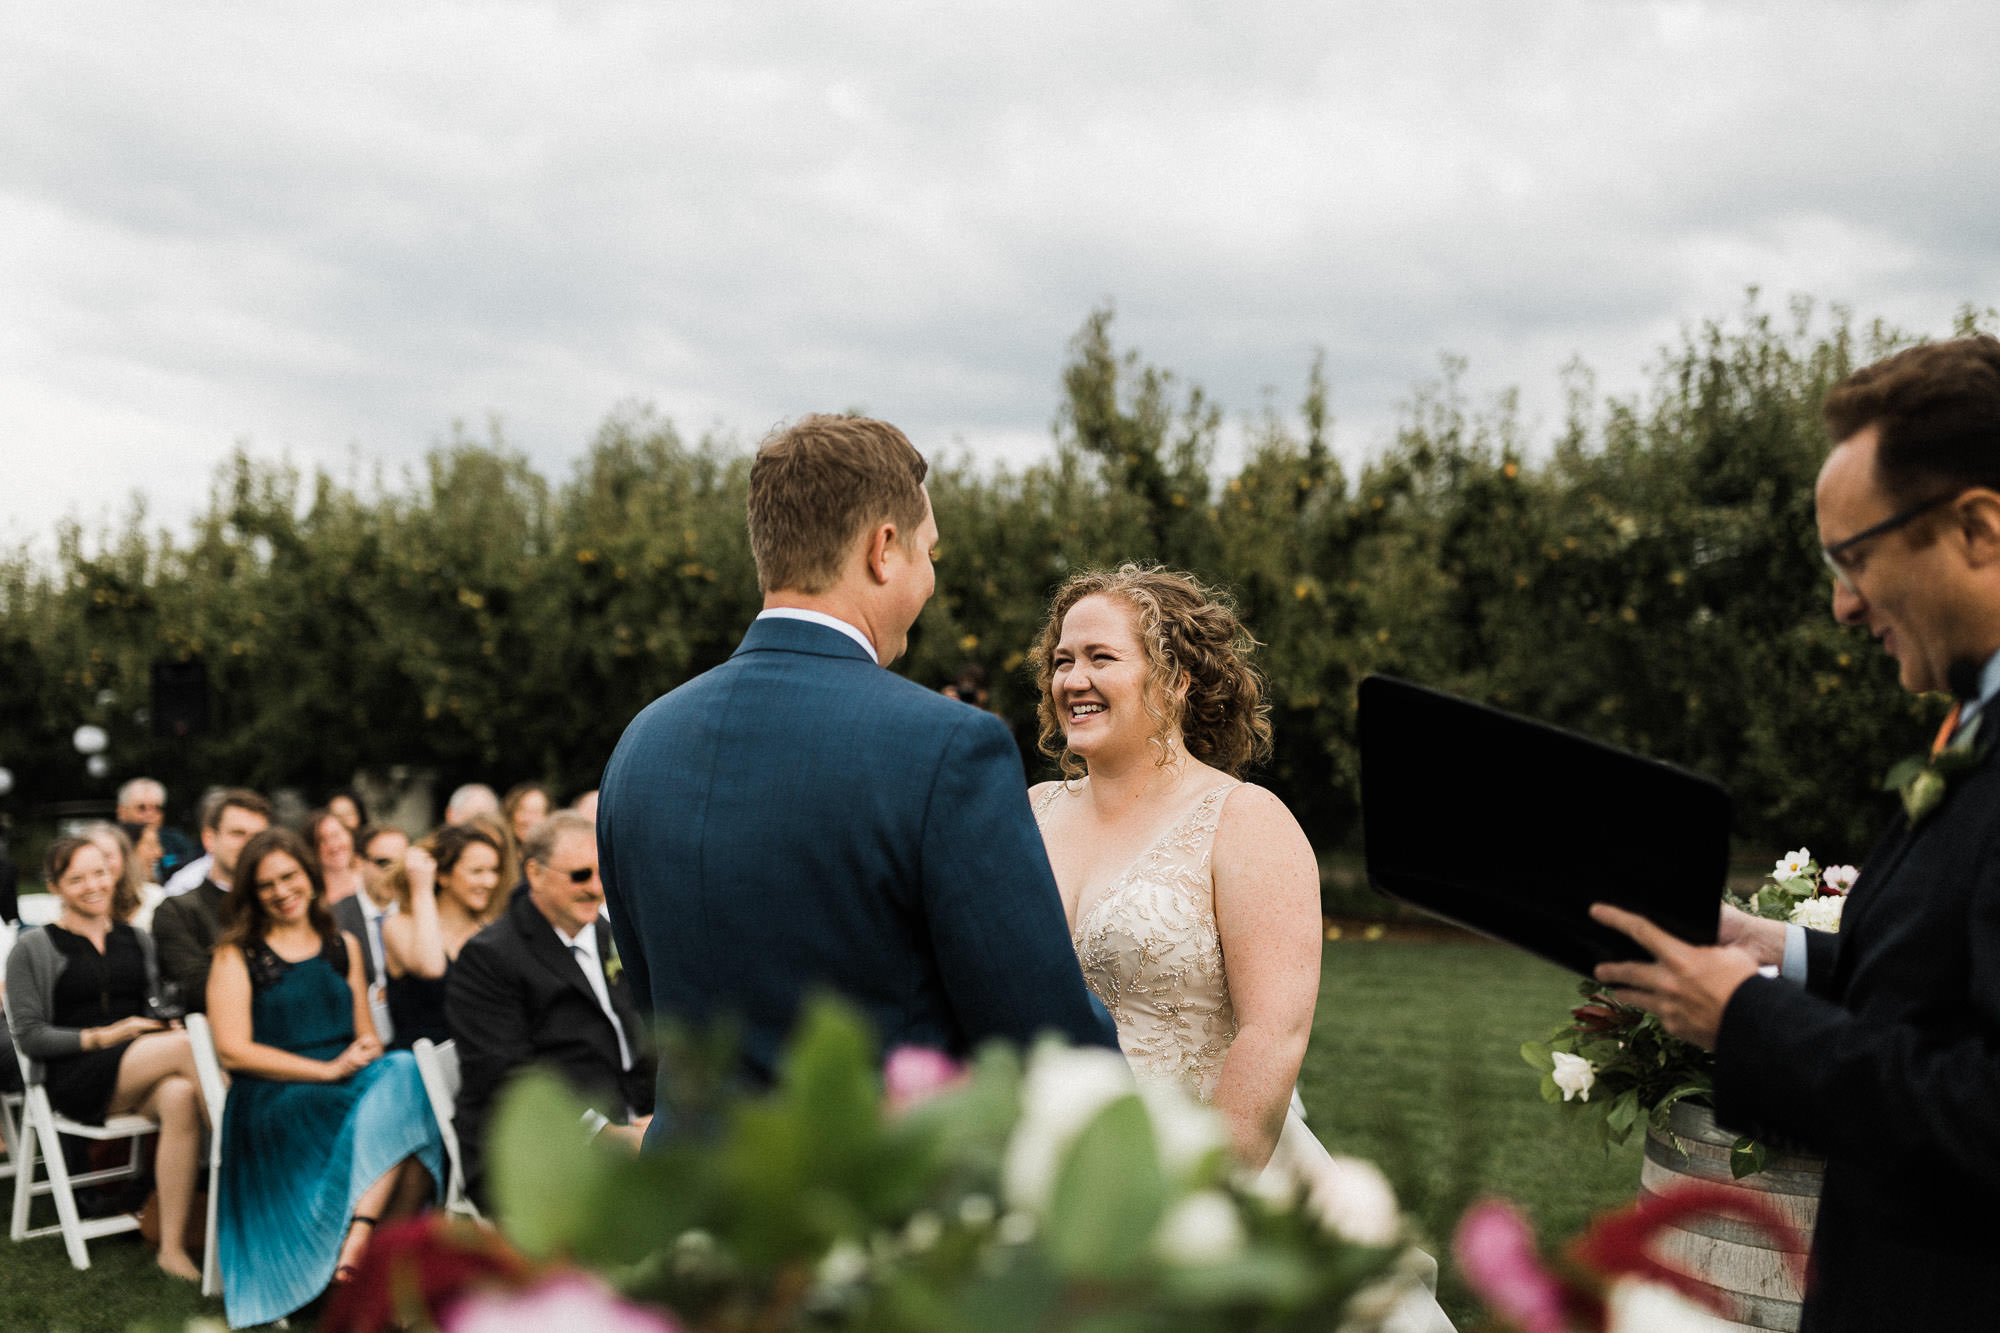 The bride laughs during the ceremony at Mt. View Orchards in Mt Hood, Oregon.